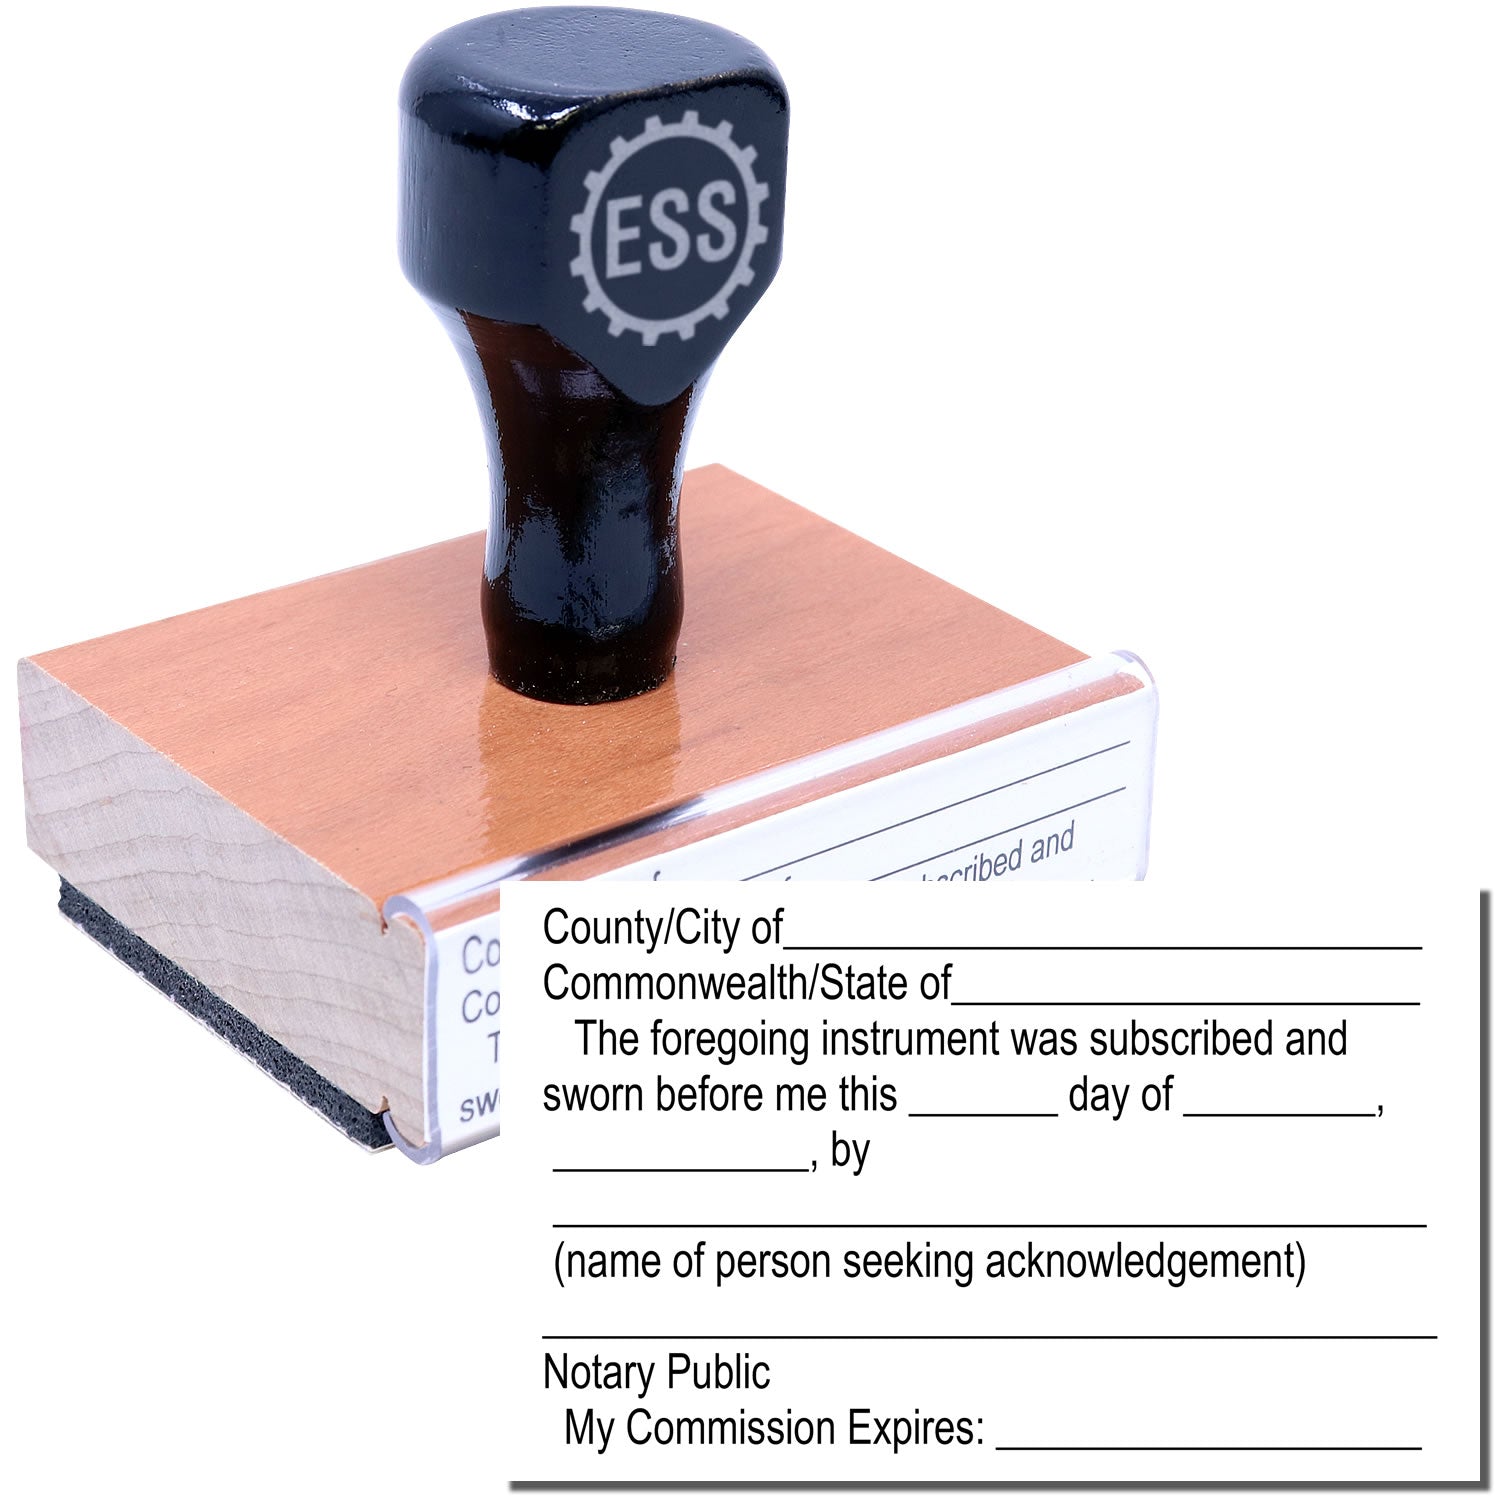 A Jurat Notary Stamp with a stamped image showing how various texts with blanks to fill appear after stamping from it.